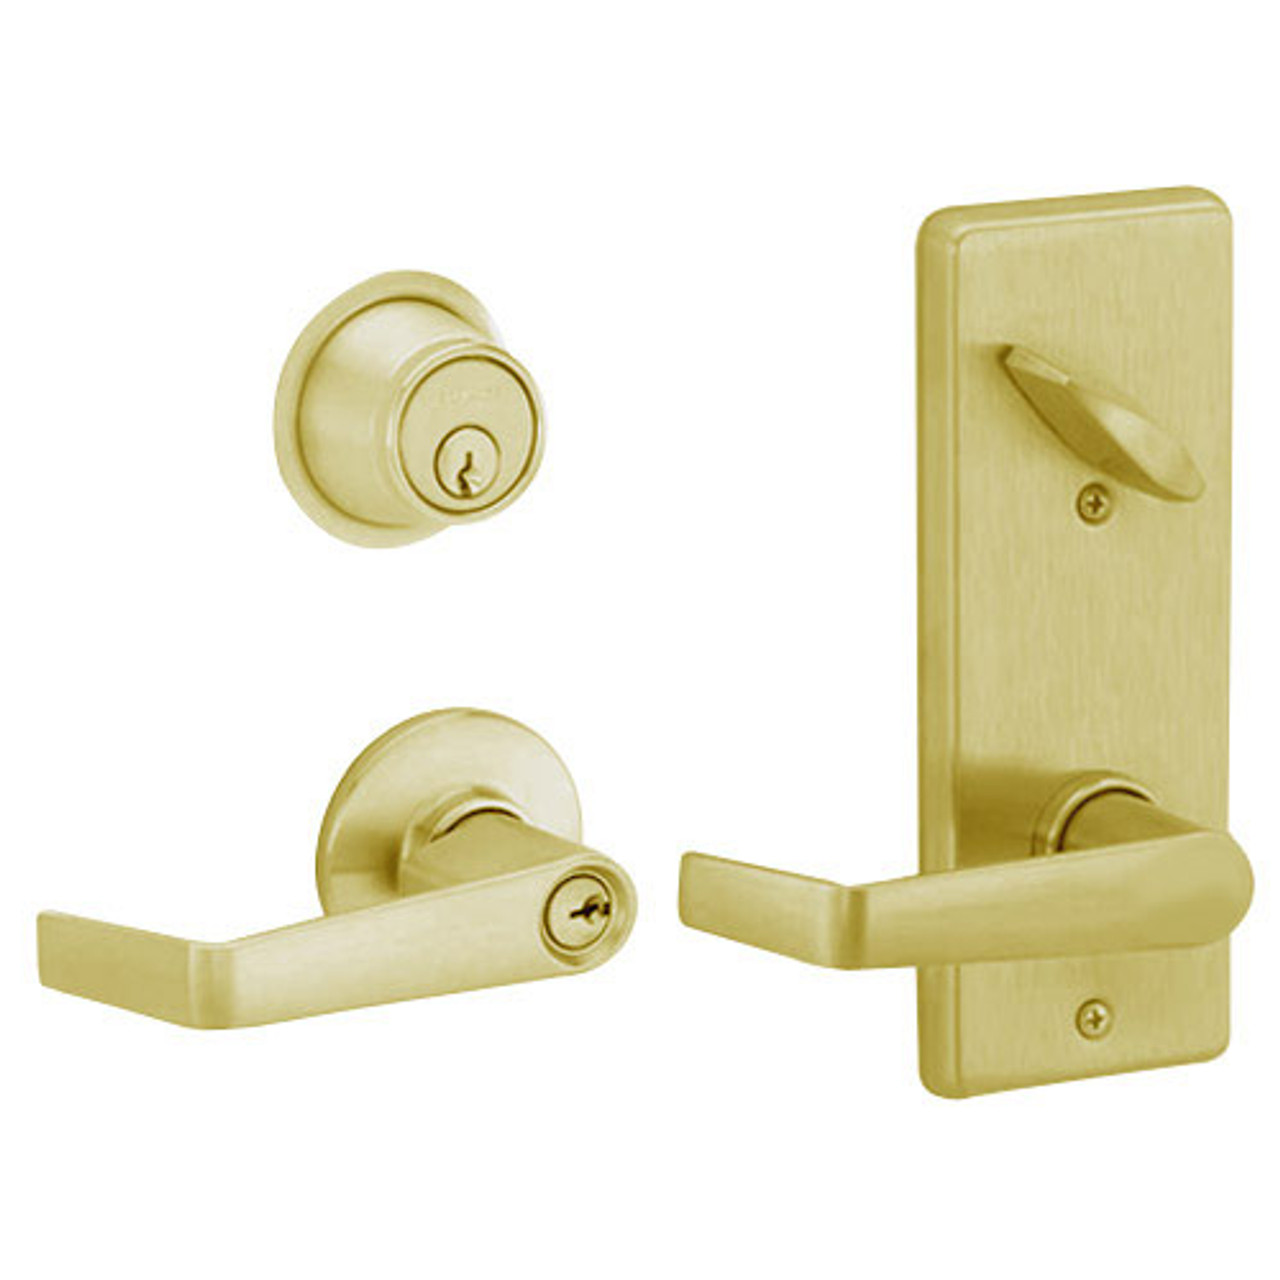 S280PD-SAT-606 Schlage S280PD Saturn Style Interconnected Lock in Satin Brass